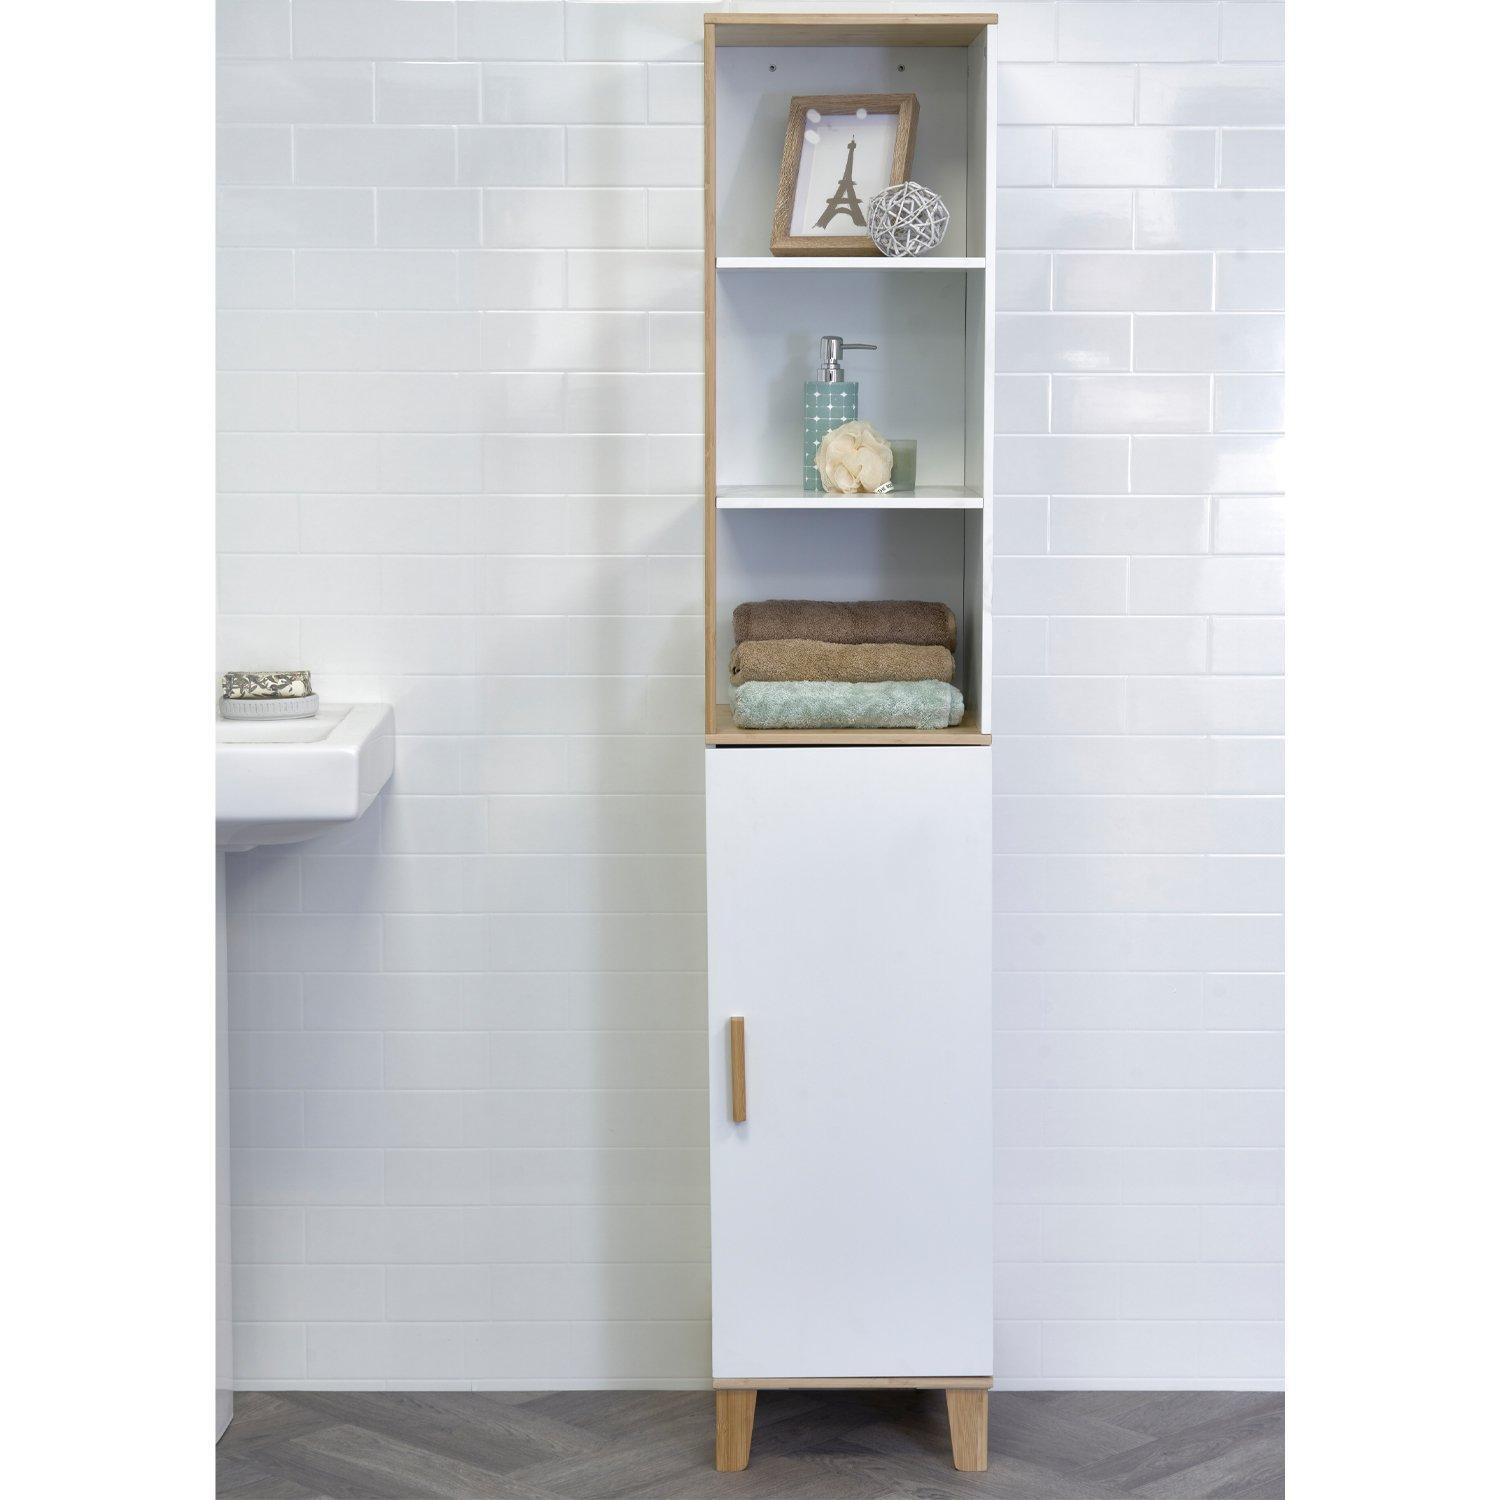 'Catania' Single Tall Floor Standing Bathroom Cabinet with Display Shelves - image 1